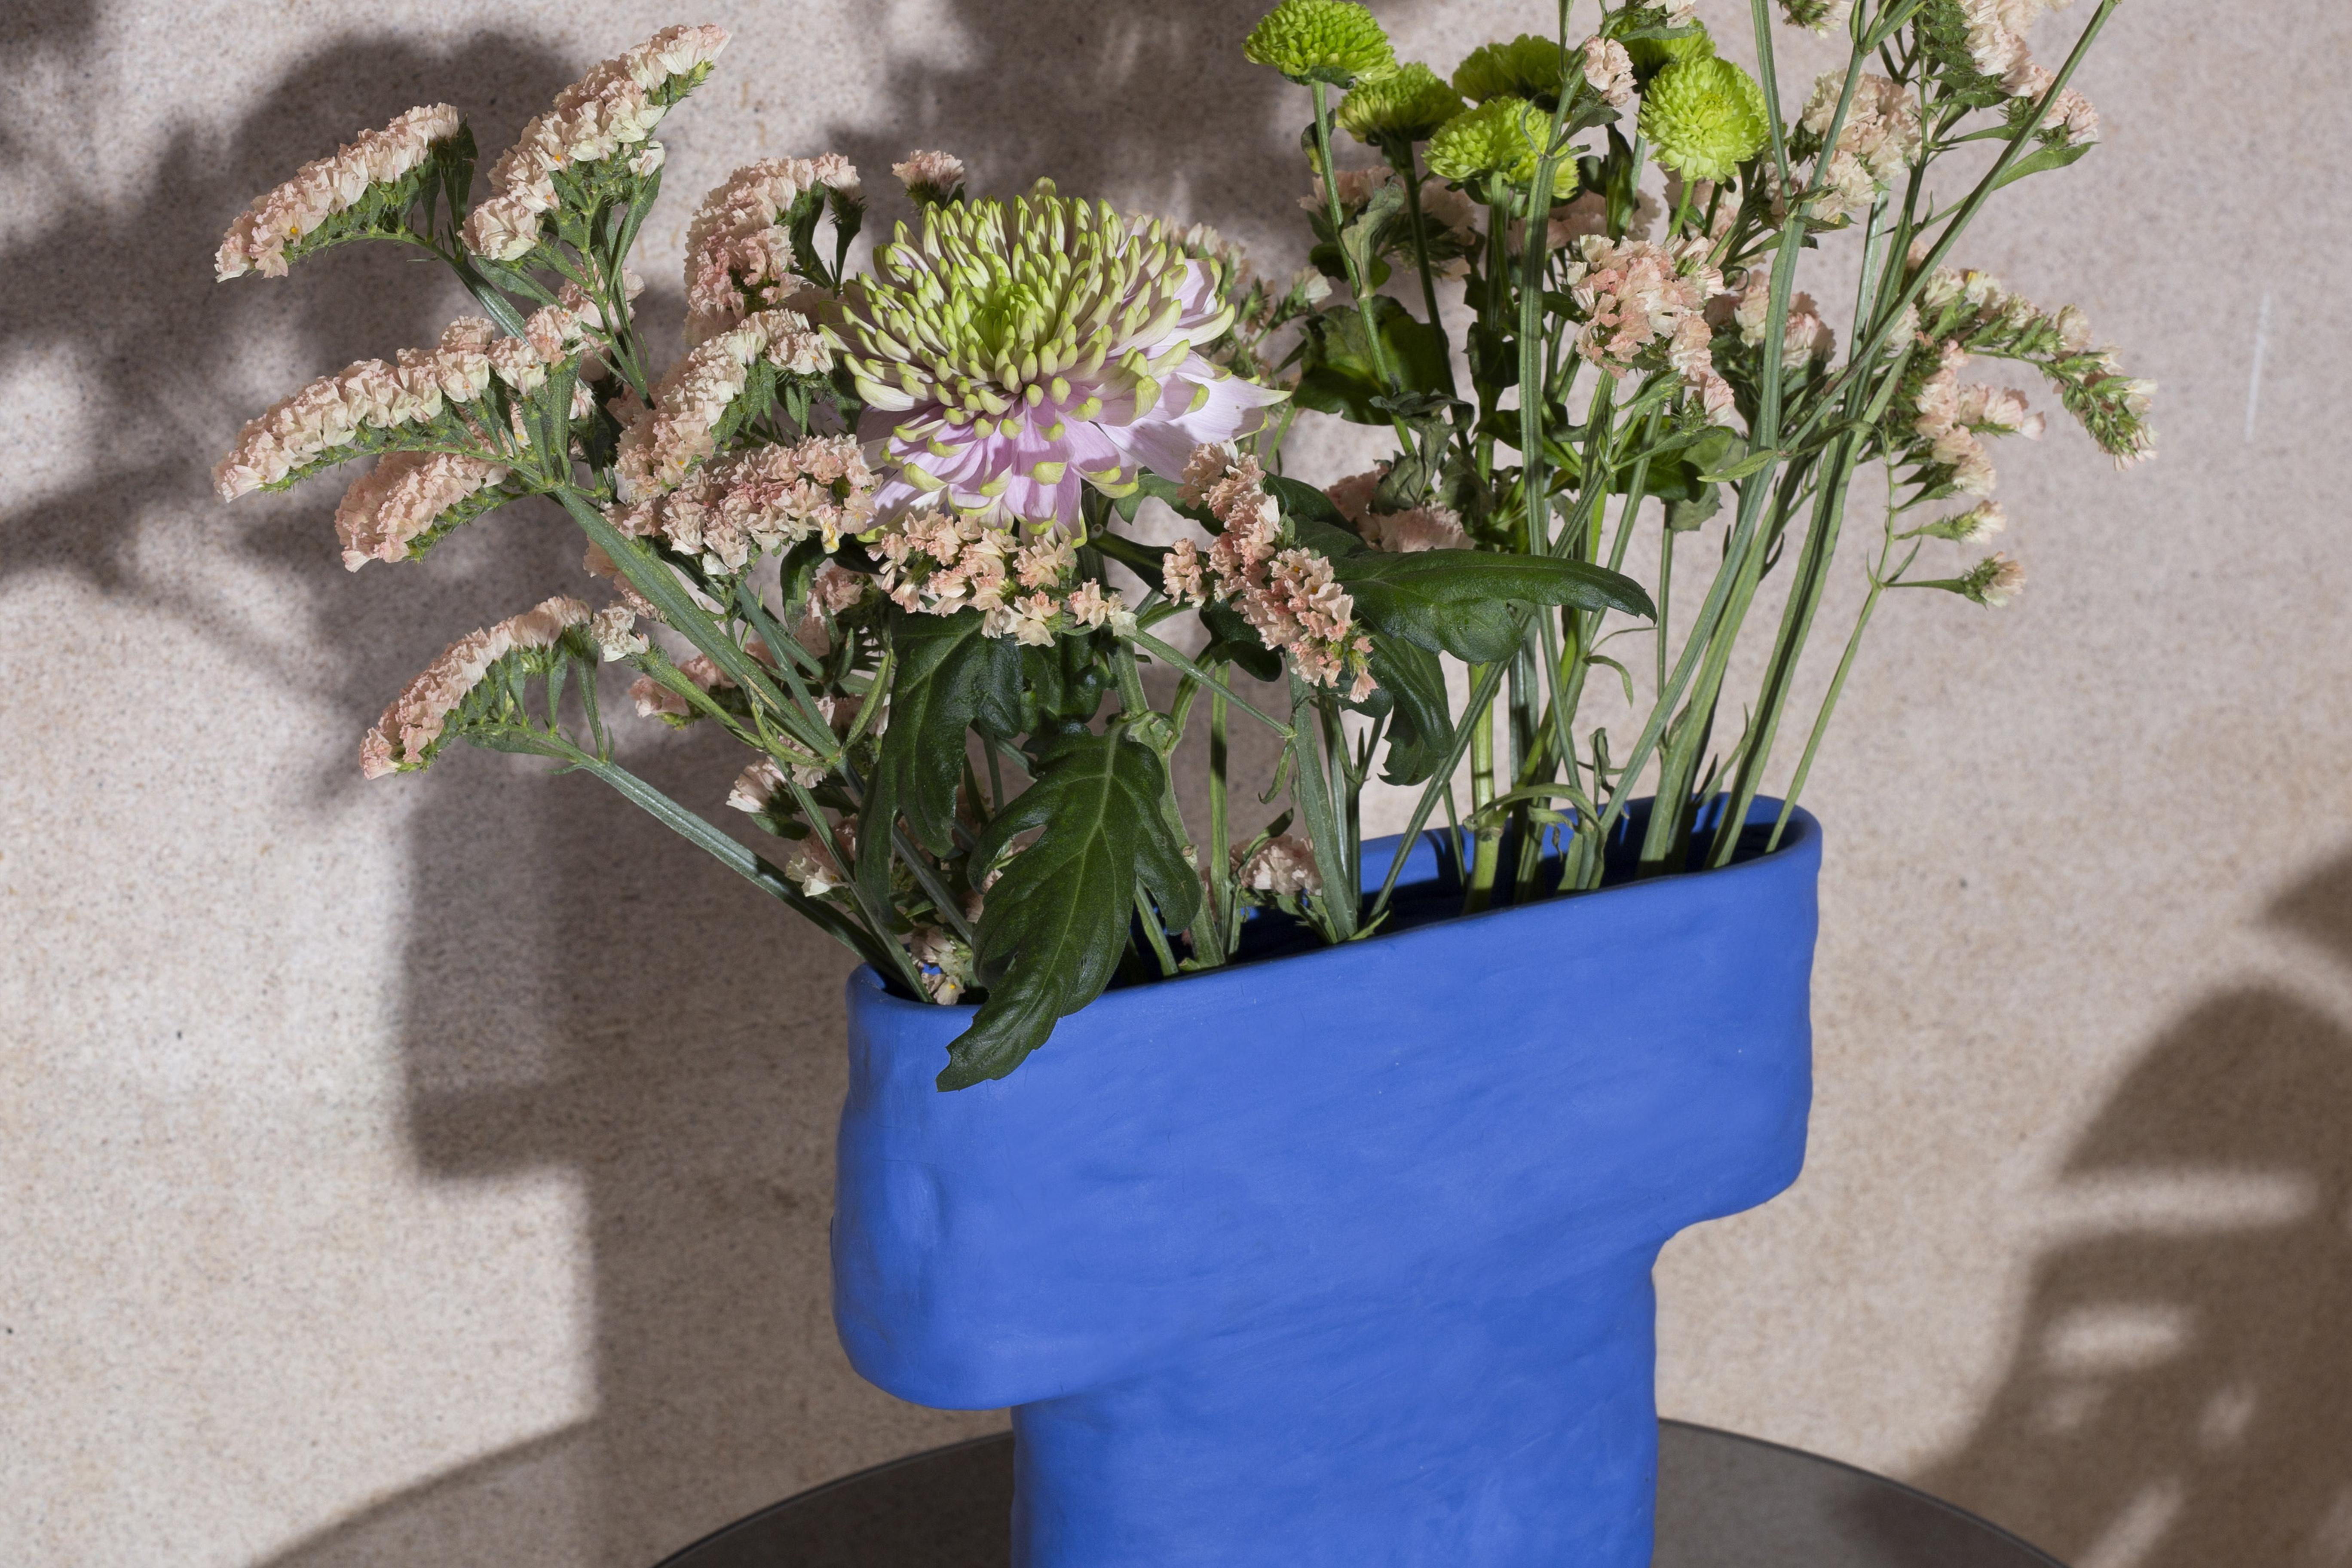 Pillar-vase takes inspiration from the ancient human-made rock formations. It references the ancient architecture and the human touch in carved stones. The sculptural vase displays flowers in a horizontal fan-like alignment and the electric blue